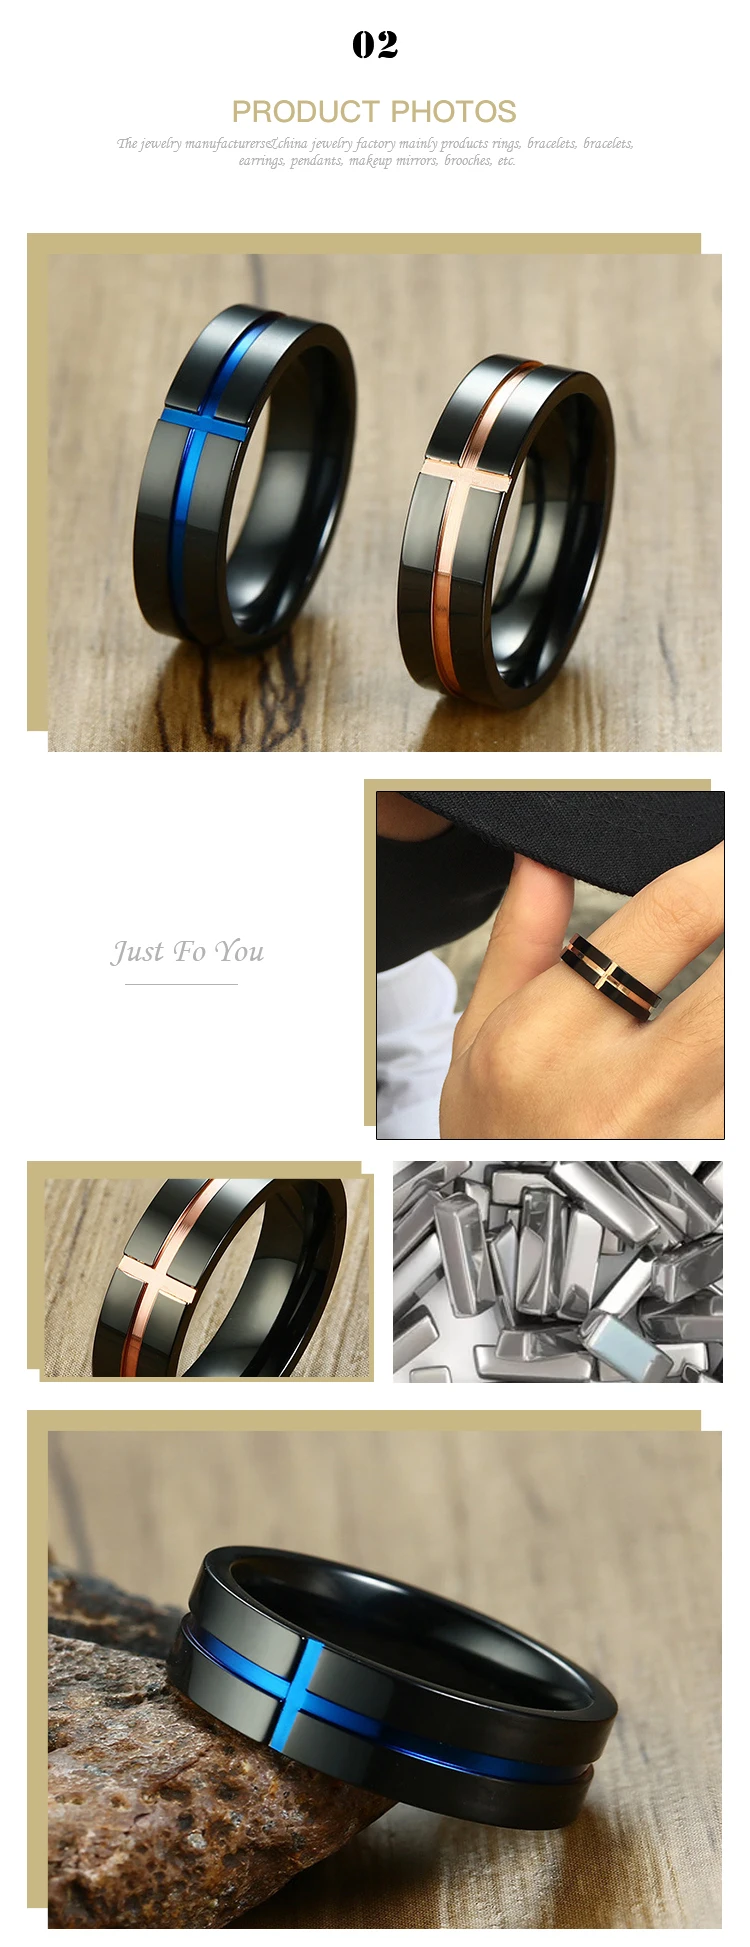 2021 New Design Face Width 6MM Stainless Steel Grooved Cross Ring Unisex Fashion Ring R-457